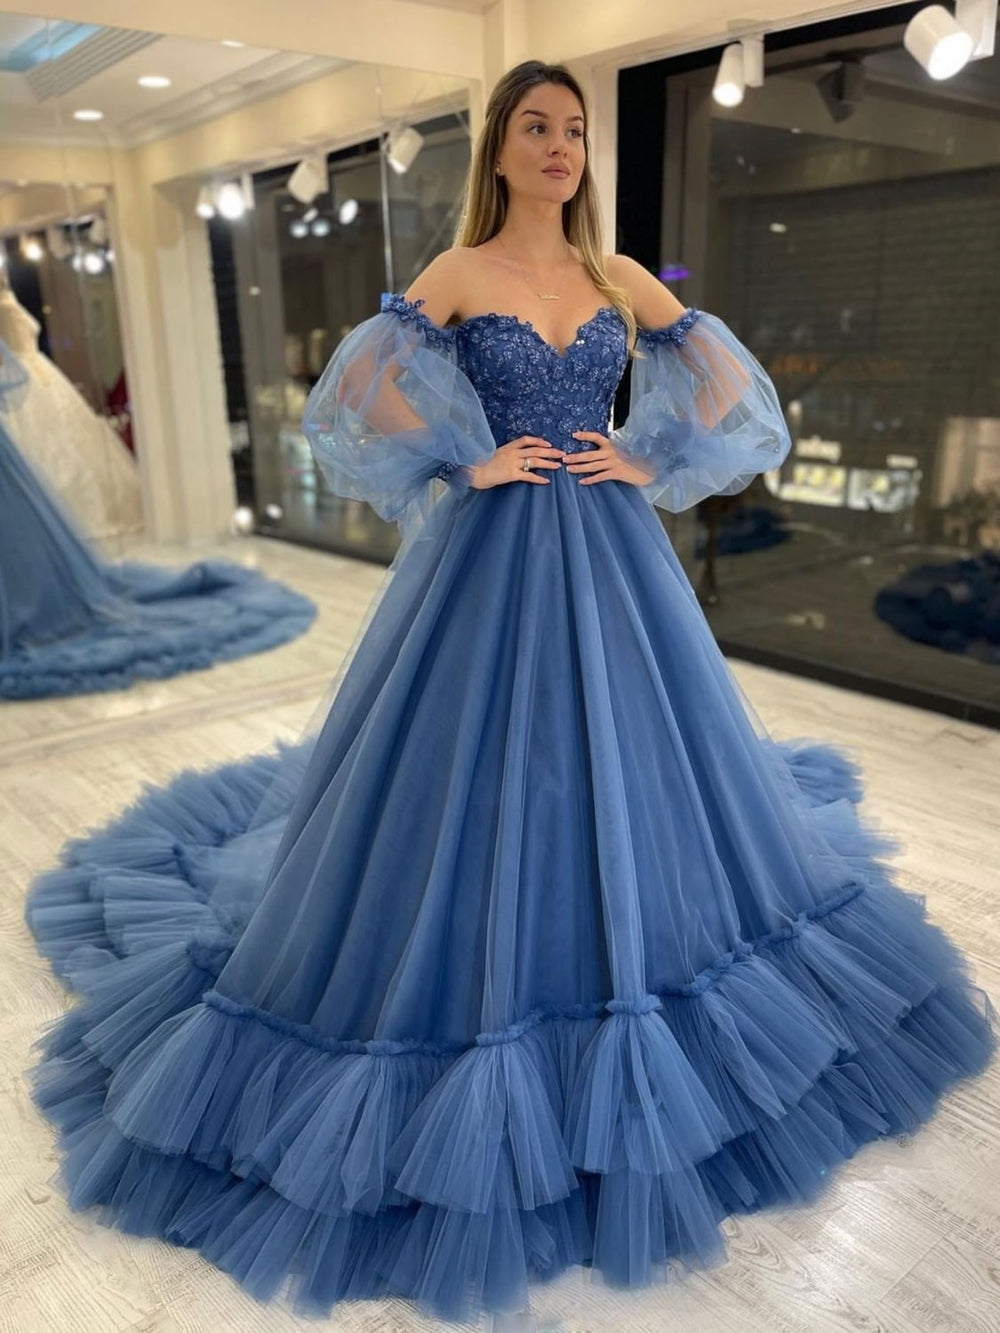 Formal Gown Royal Blue Dresses Women | Royal Blue Evening Gowns Sleeves -  Blue Neck - Aliexpress